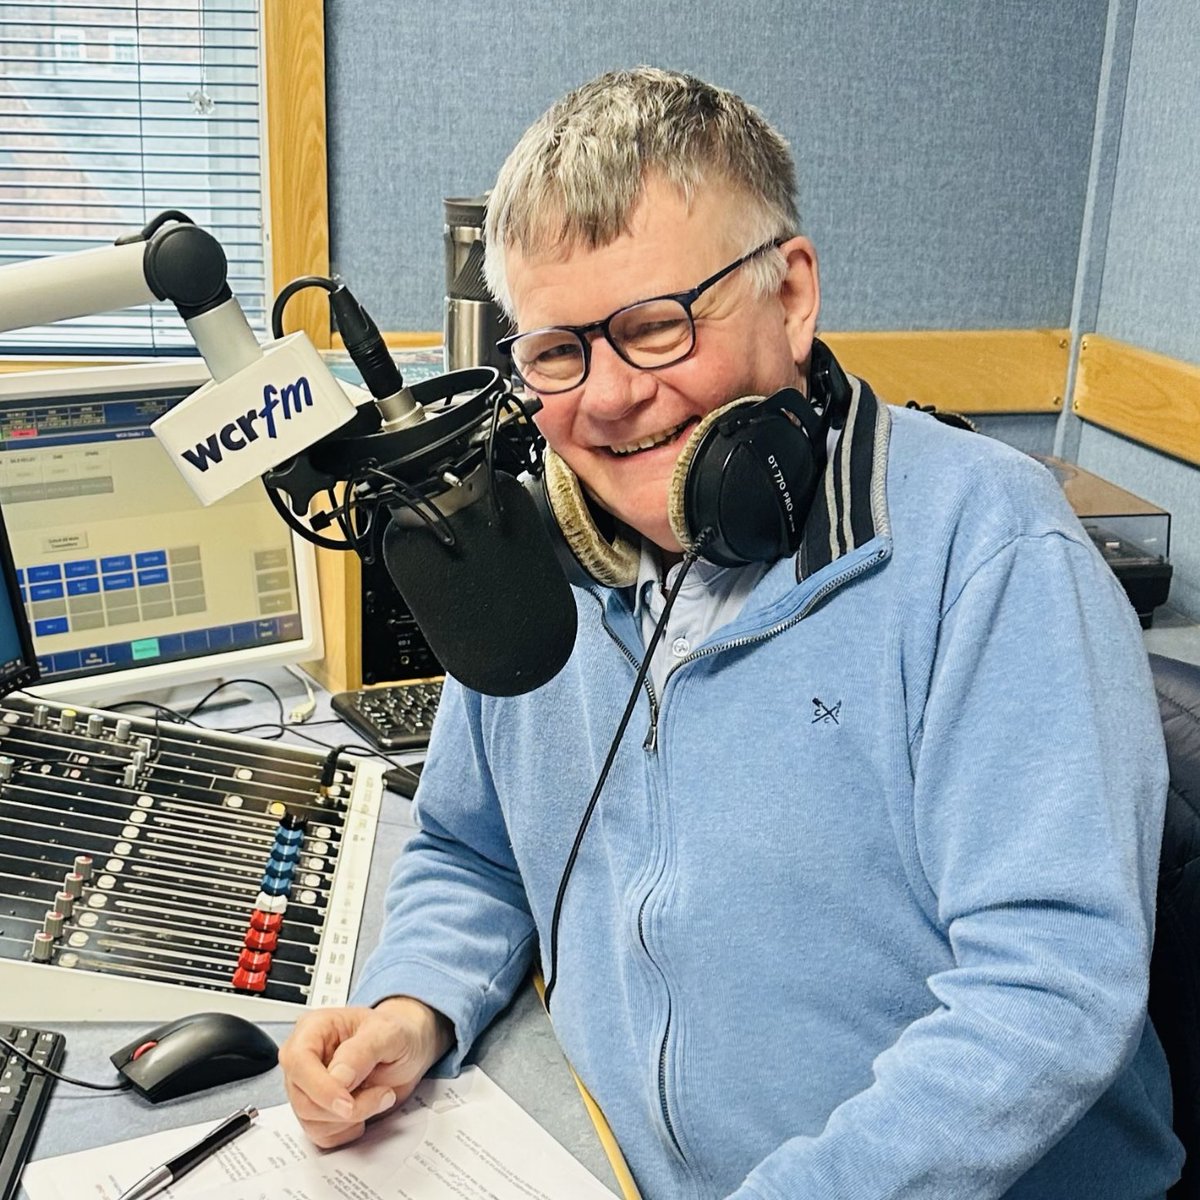 On air now - Wolverhampton Mornings with Chris Allen @Chris_WCR. Music and news for your Monday morning, with our Mental Health Moment with Gray from @WolvesSams and also some household money saving tips from @debbiehuxton. 101.8FM | DAB | wcrfm.com | Smart Speaker